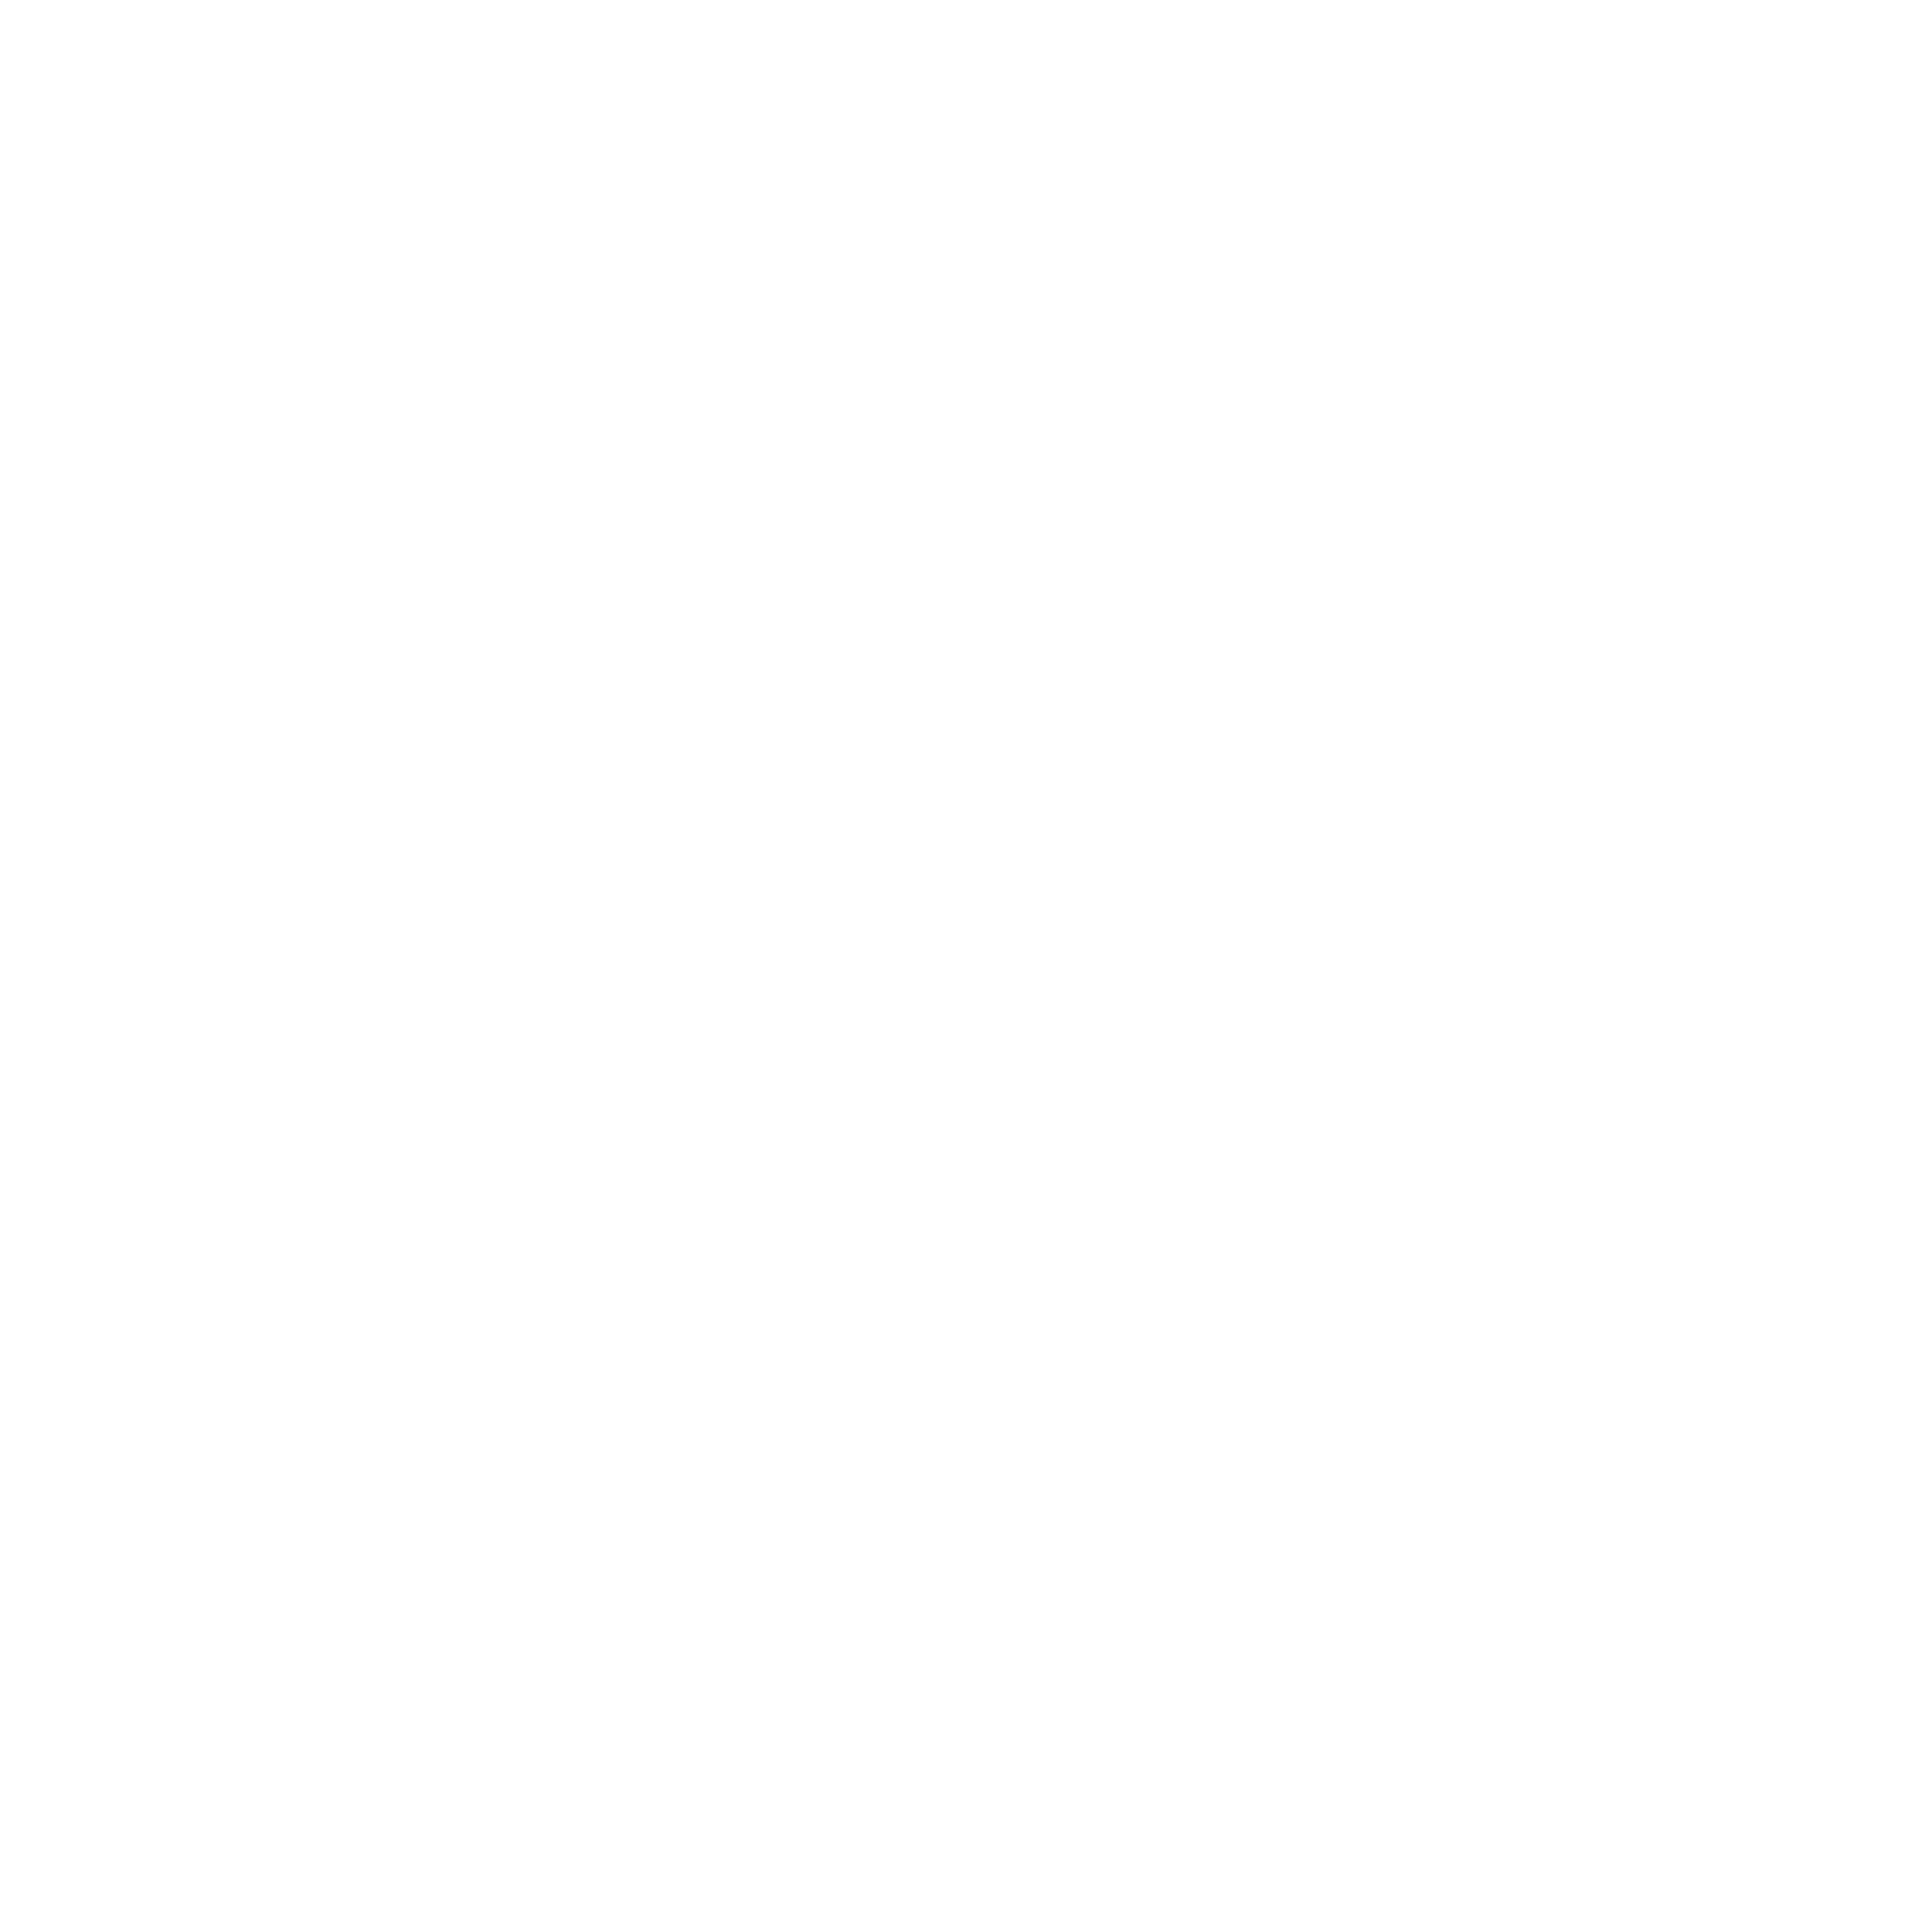 Cube Cryptocurrency icon